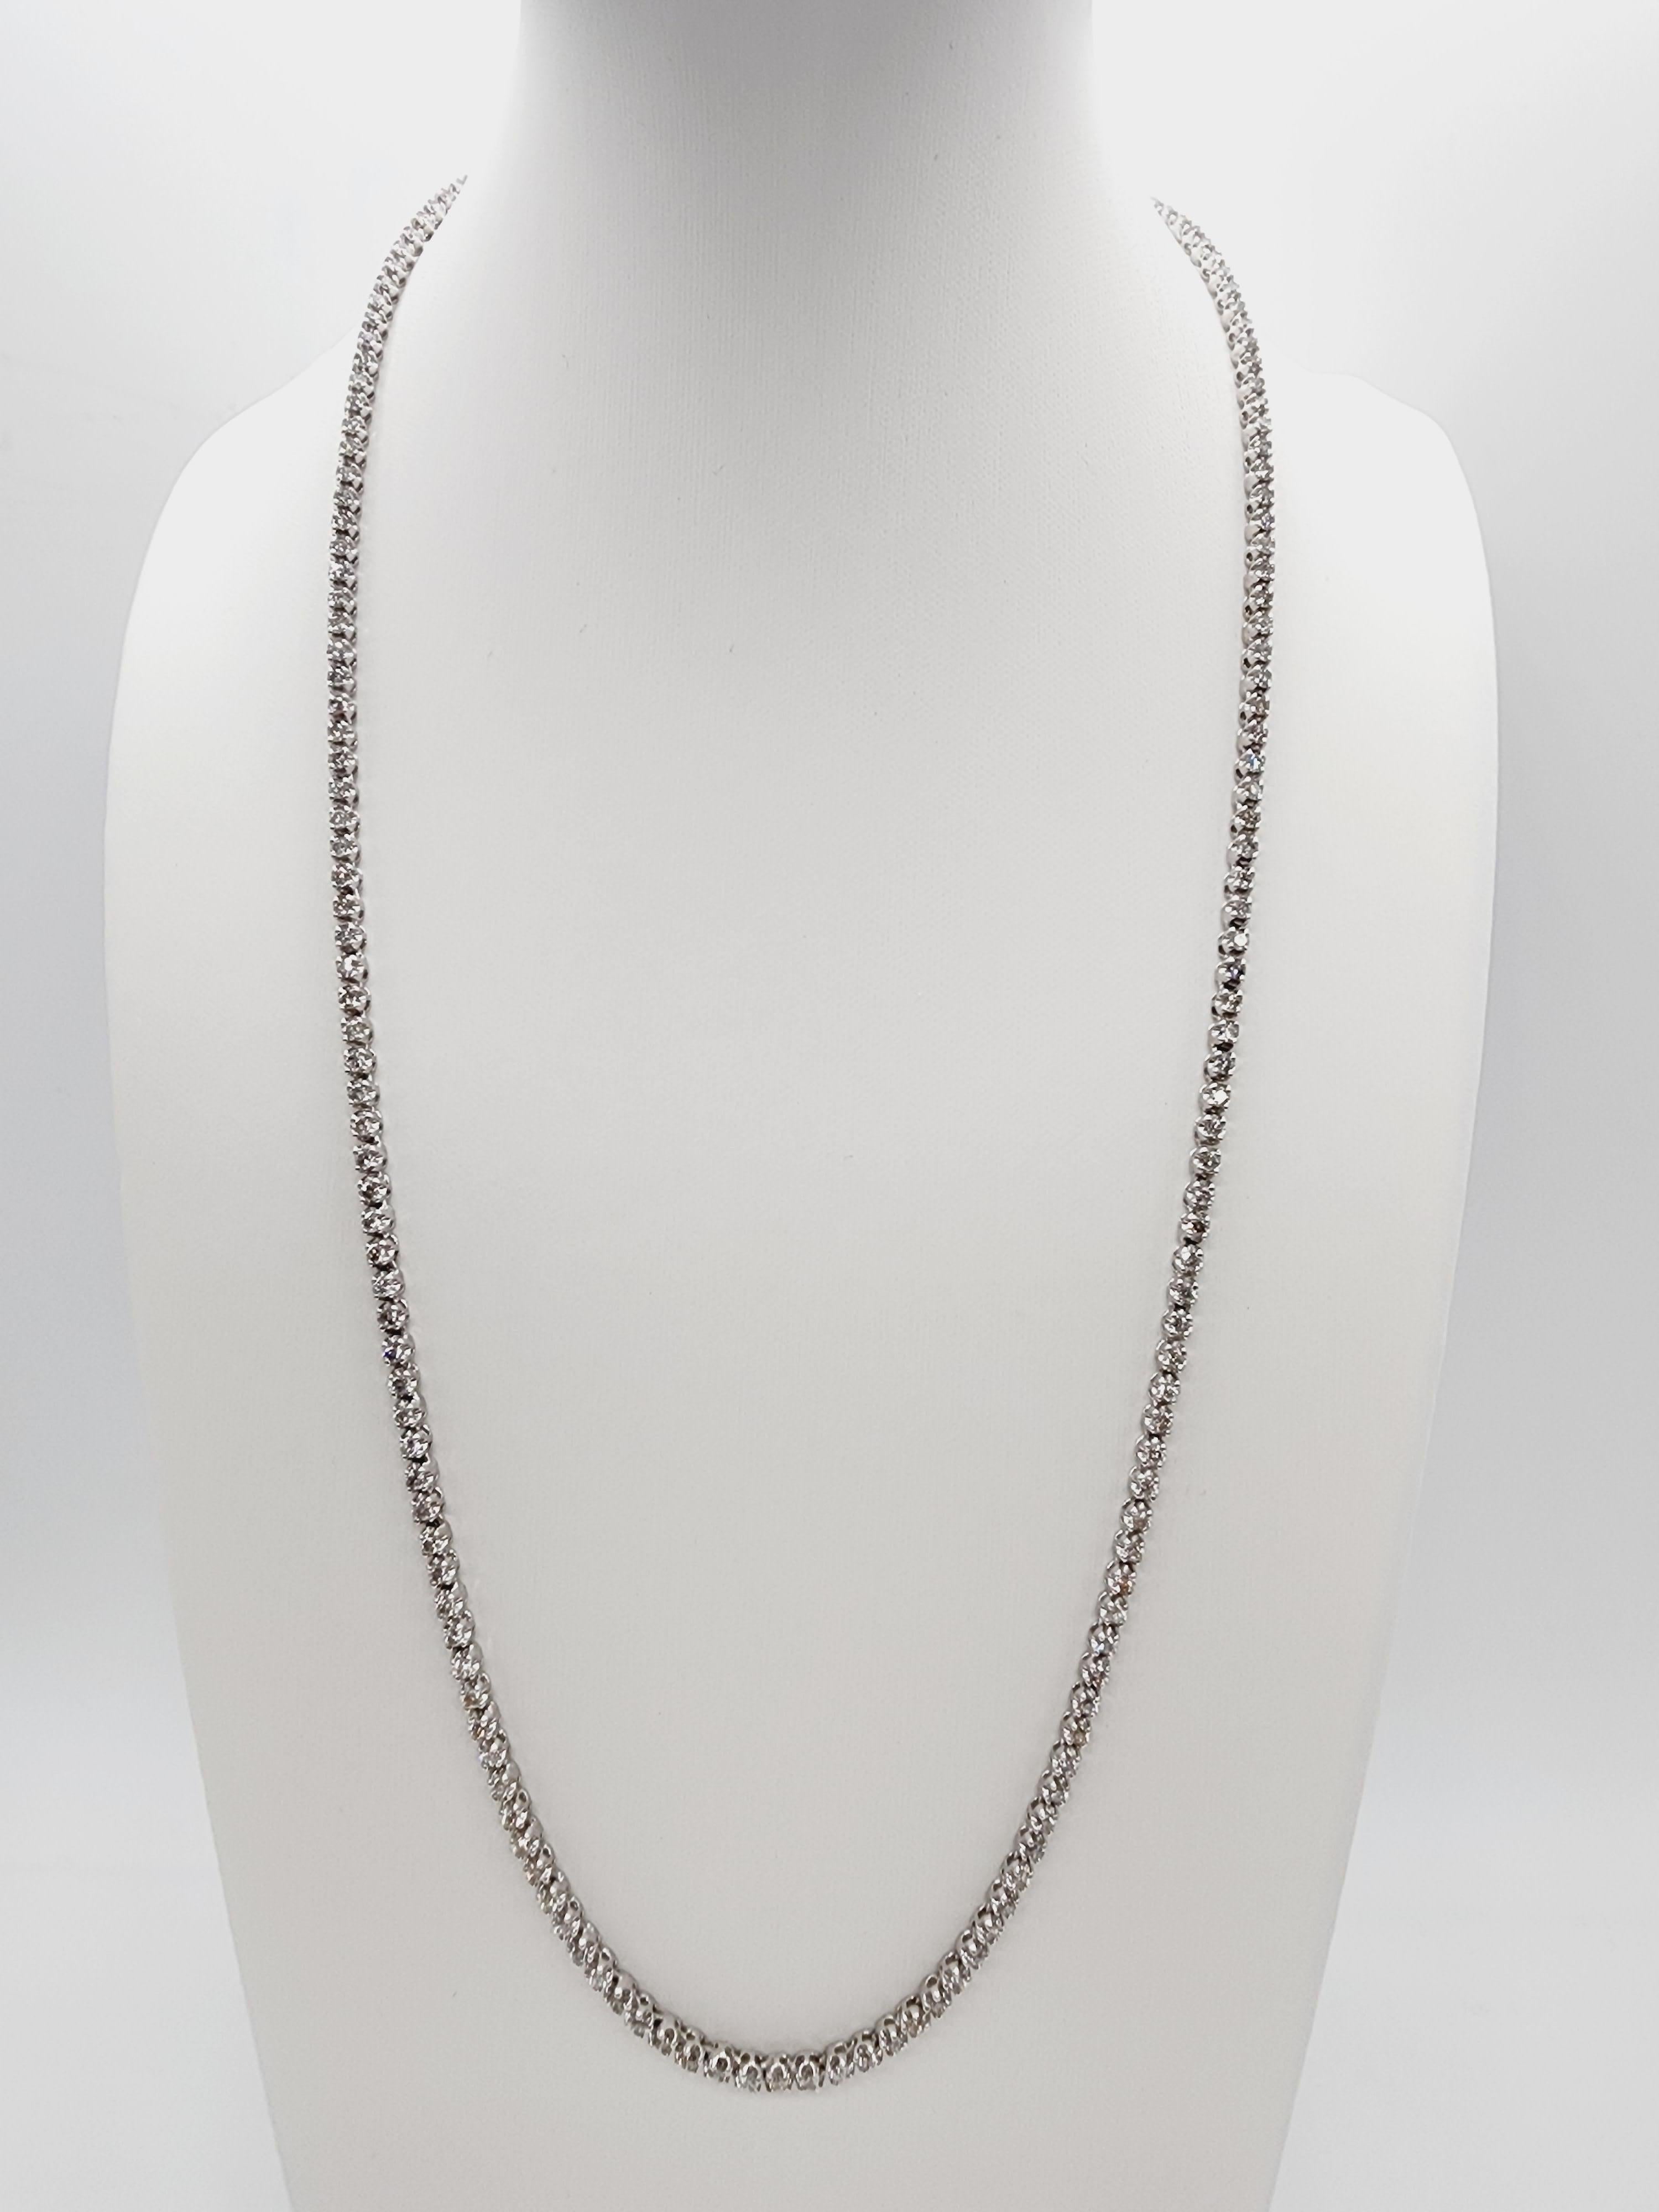 Brilliant and beautiful buttercup necklace, natural round-brilliant cut white diamonds clean and excellent shine. 14k white gold buttercup setting. 22 inch length. Average G Color, SI Clarity.  2.9 mm wide.

*Free shipping within the U.S.*